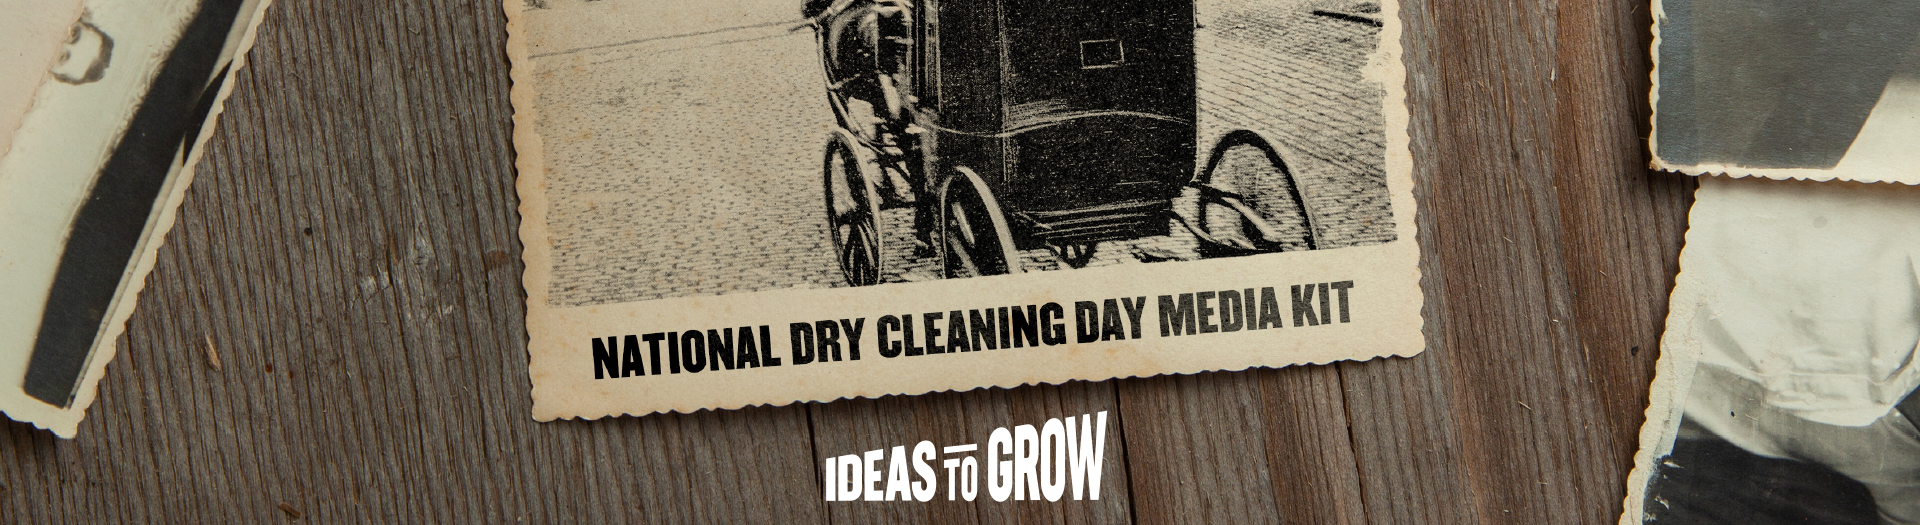 National Dry Cleaning Day Media Kit